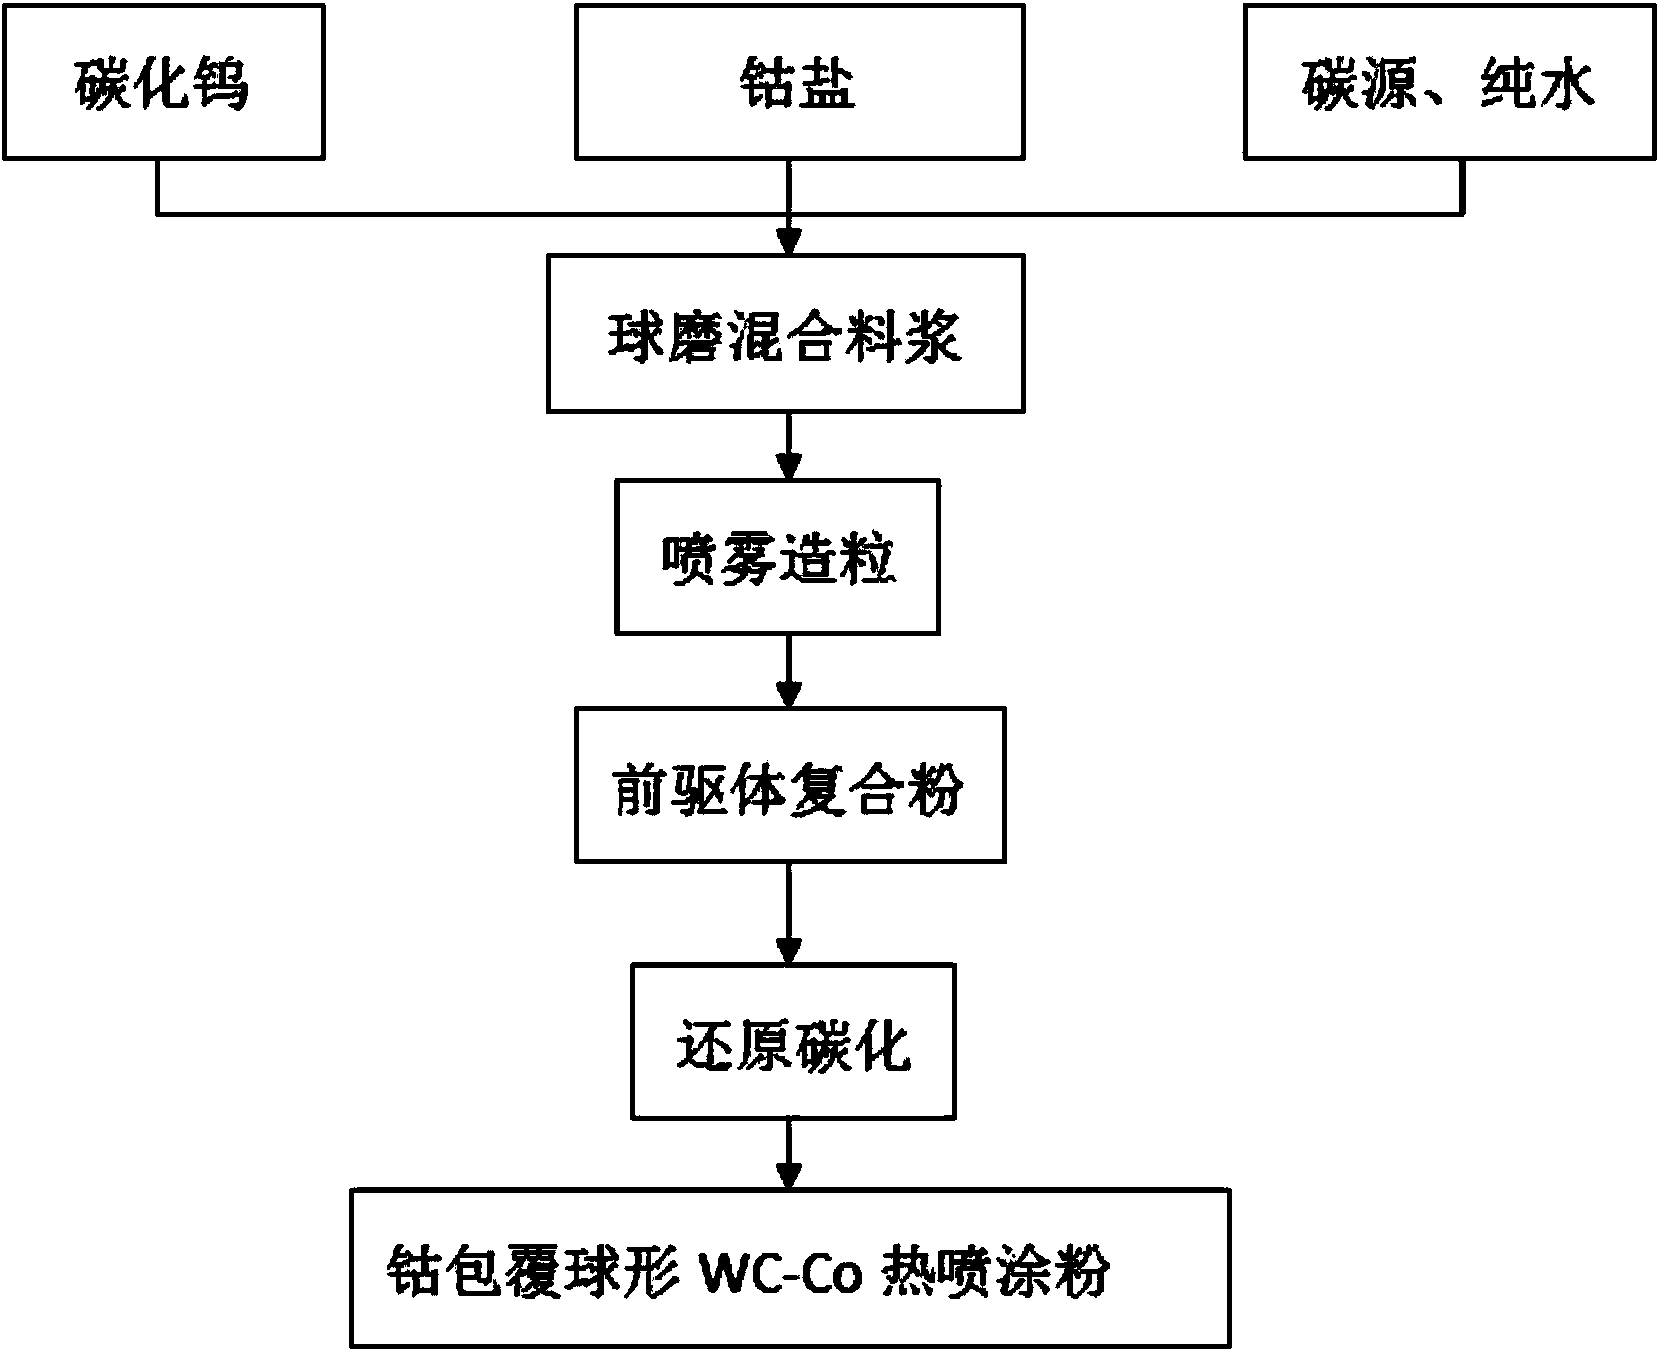 Method for preparing WC-Co powder used for thermal spraying